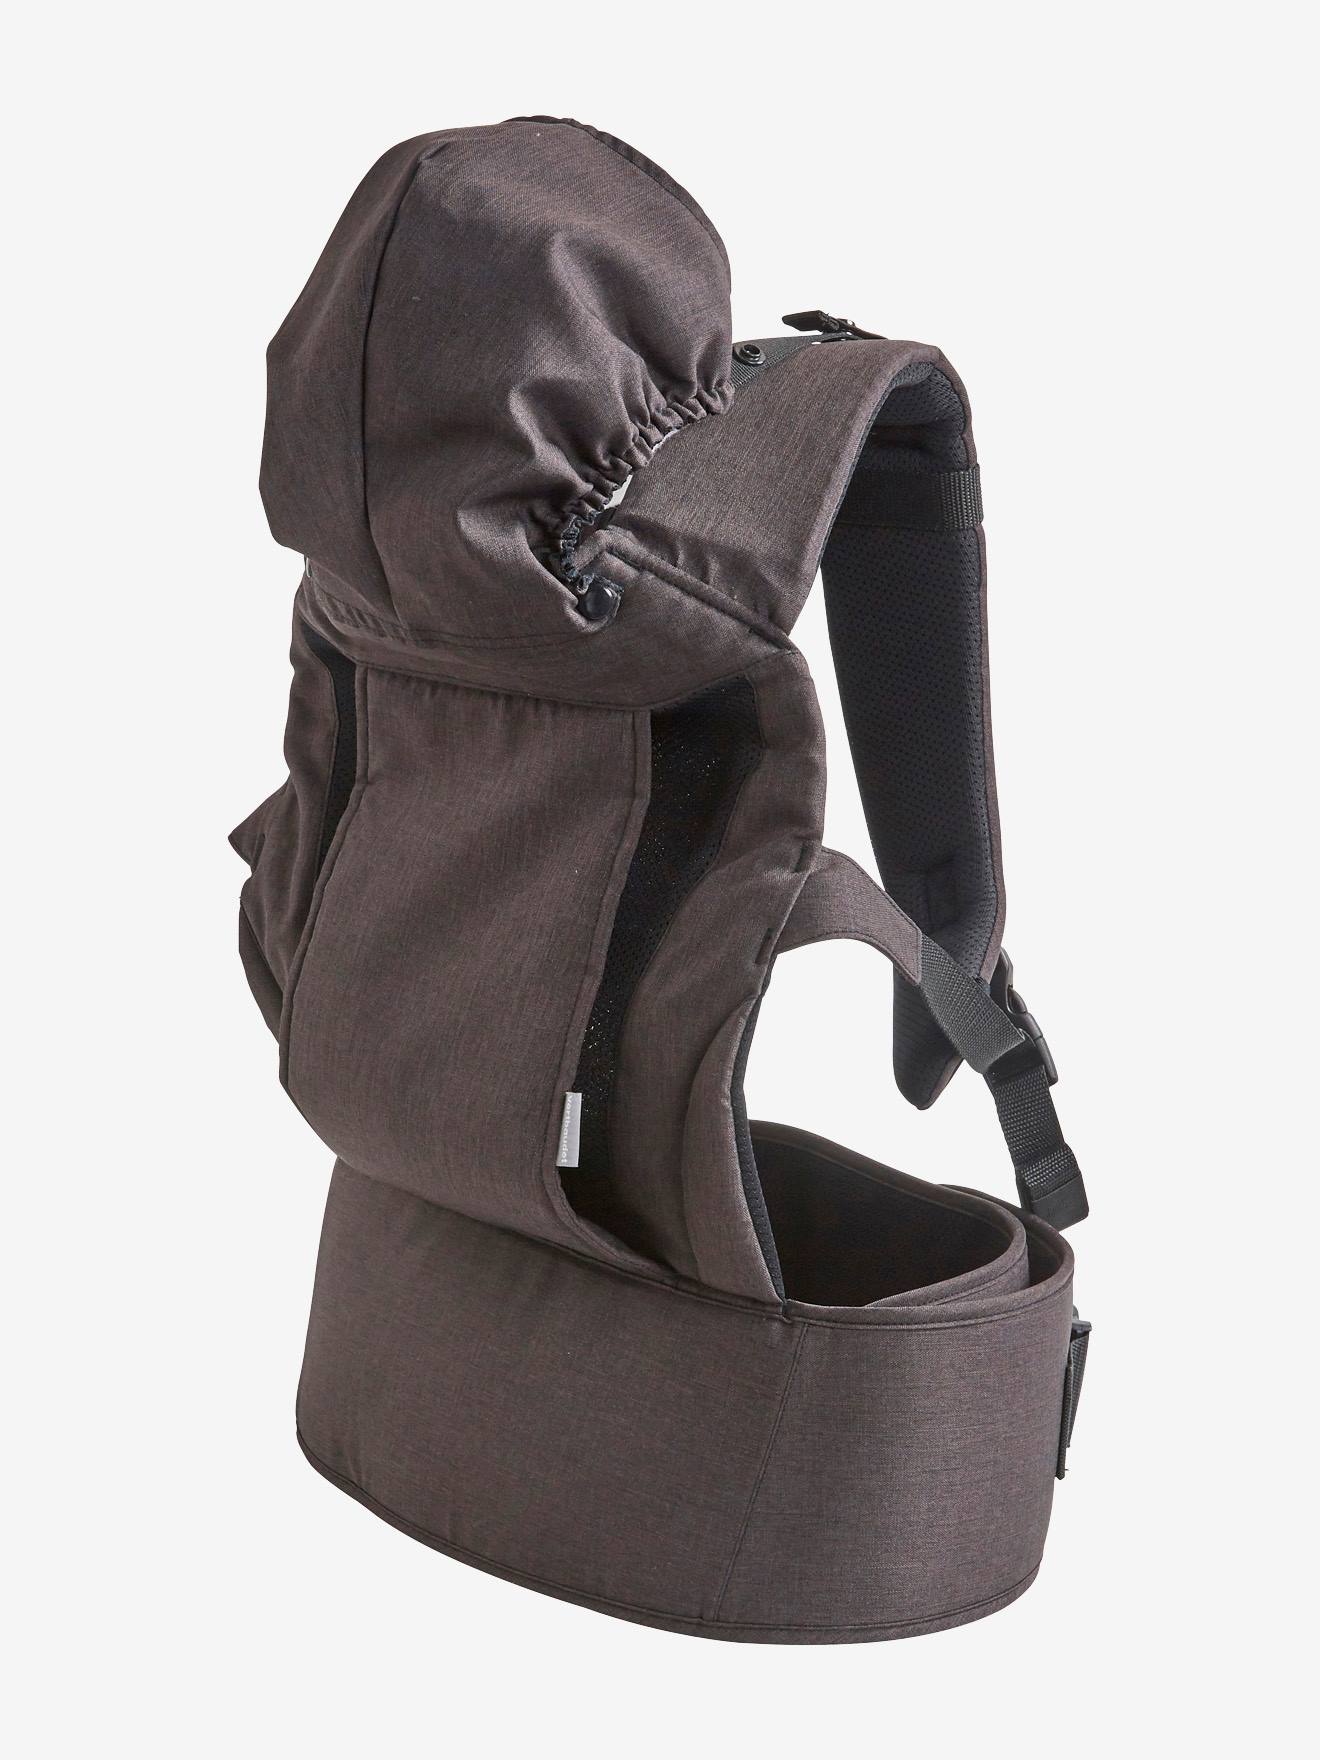 leather baby carrier